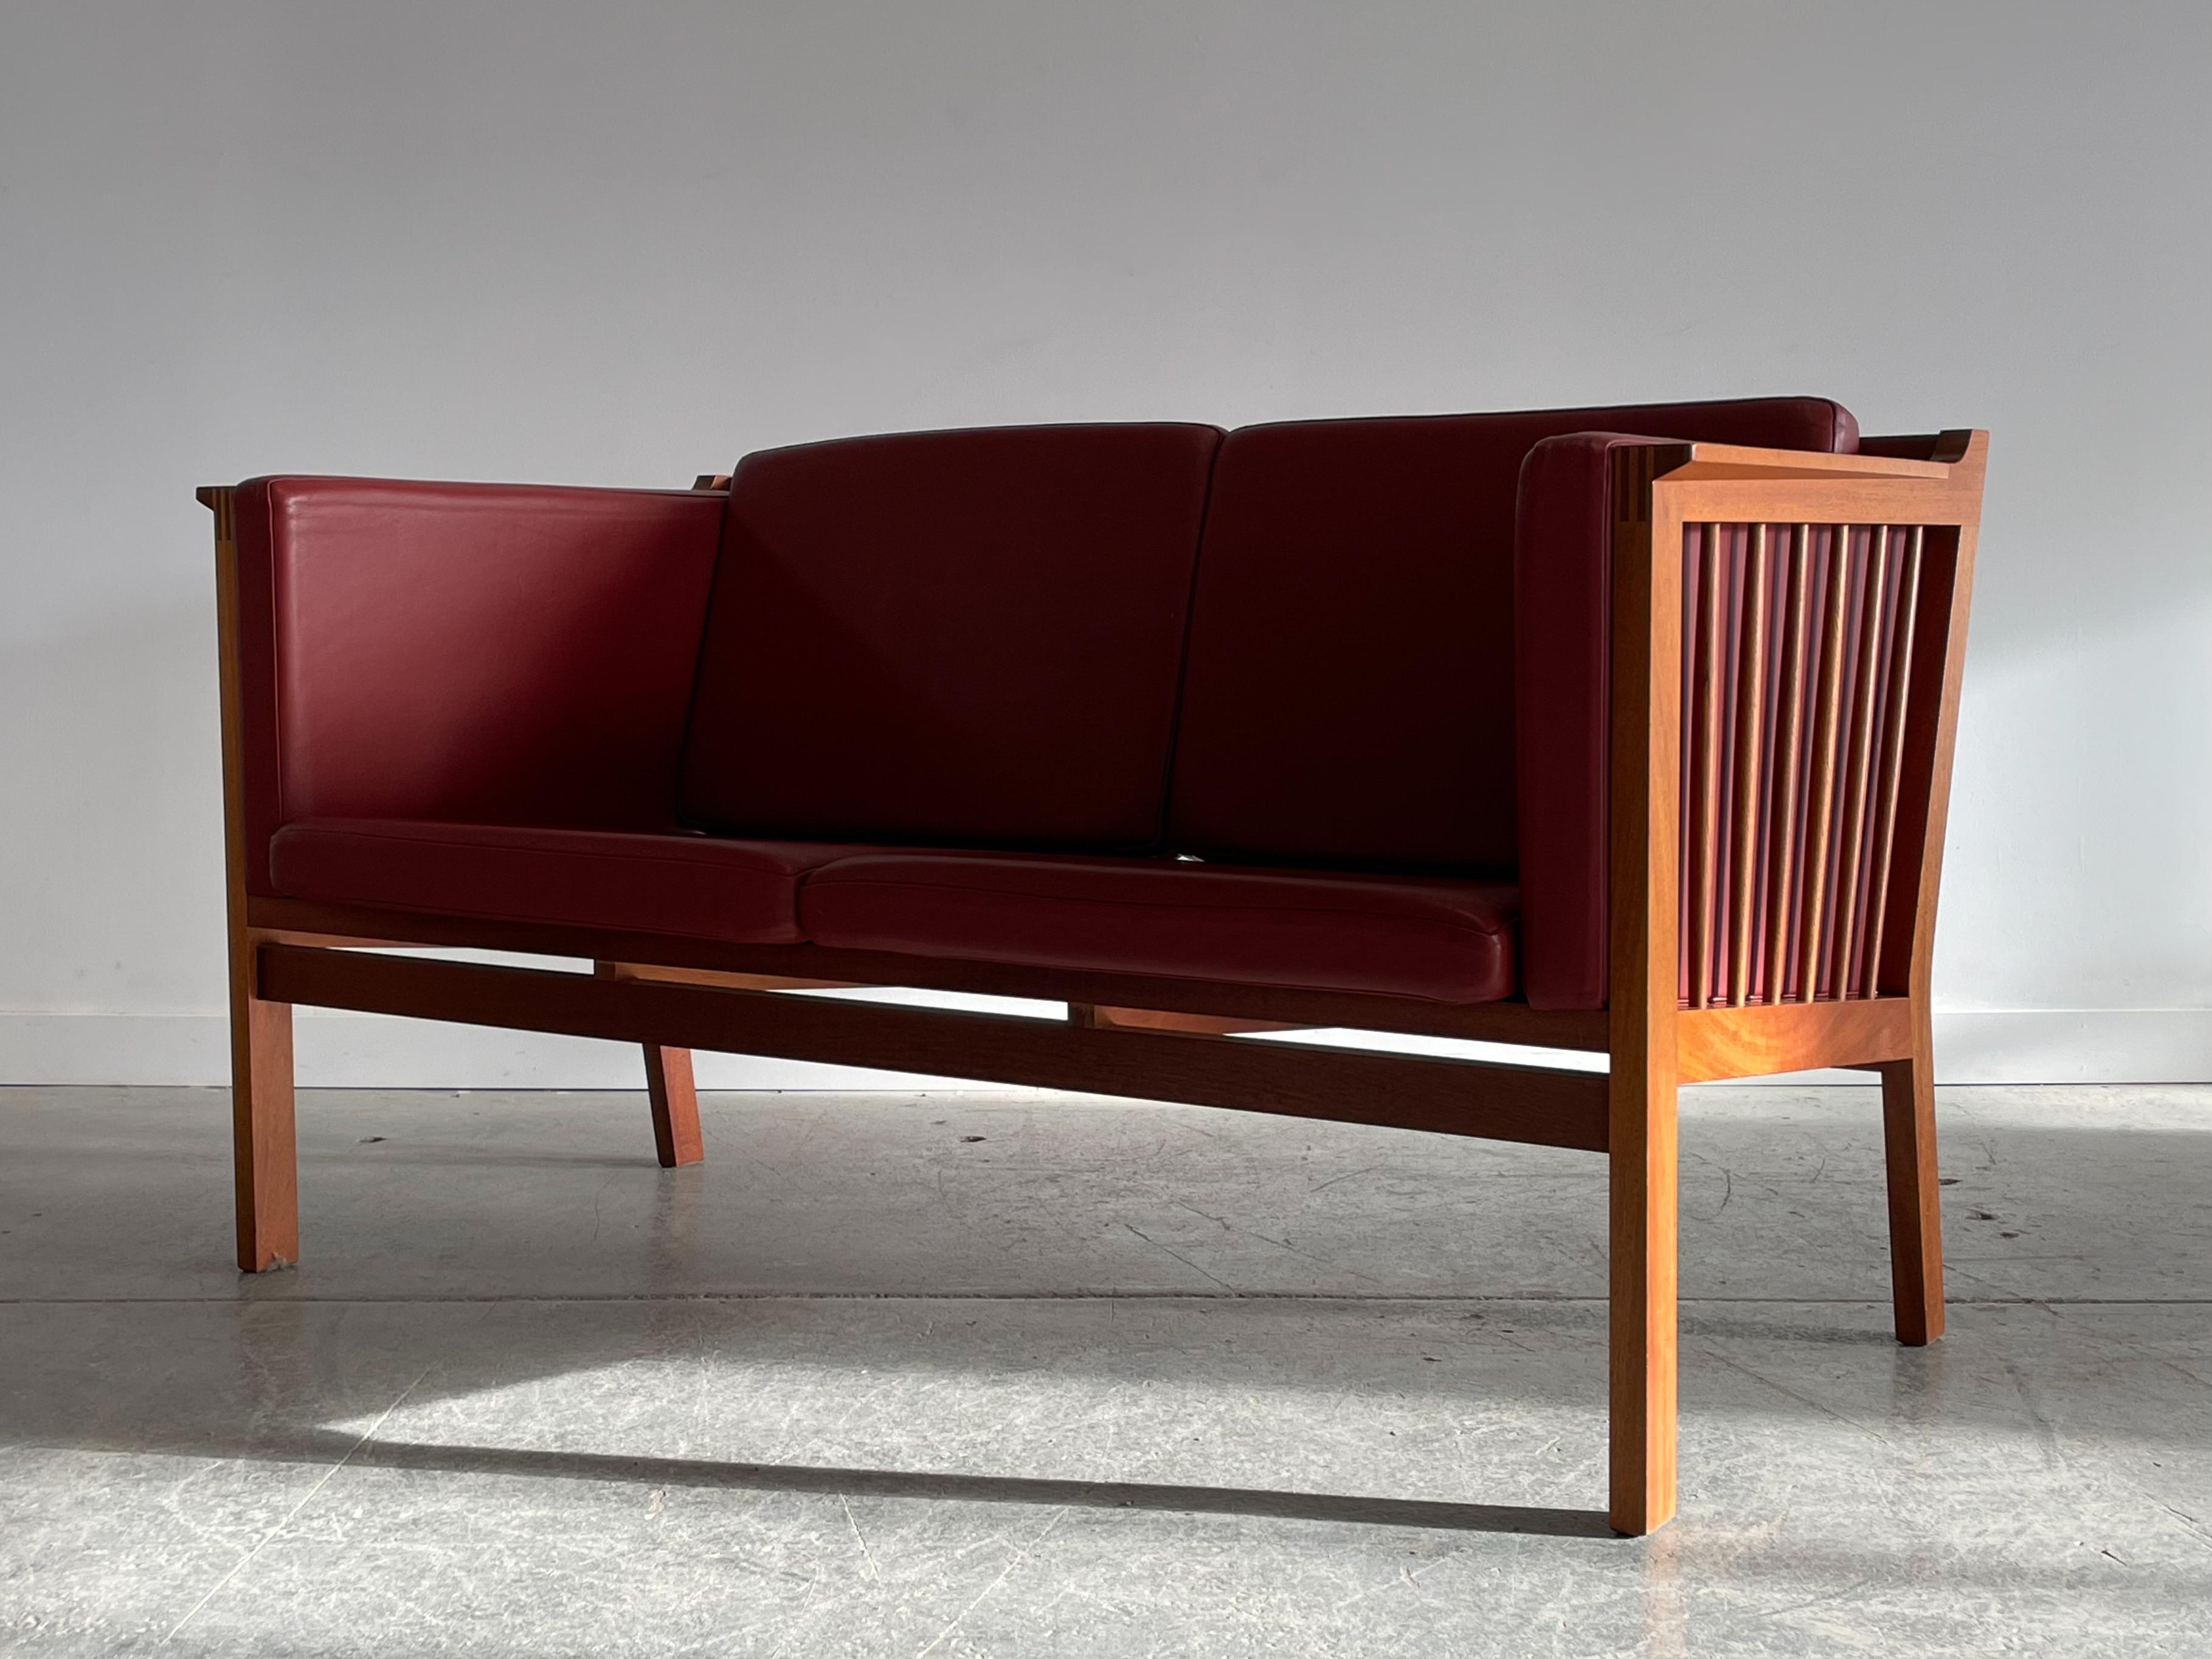 Simple and elegant. Mahogany and leather two seater sofa designed by Christian Hvidt for Soborg Mobler, Denmark. This piece features a beautiful spindle-back mahogany frame, angular armrests with box joinery, and oxblood leather cushions. Measures